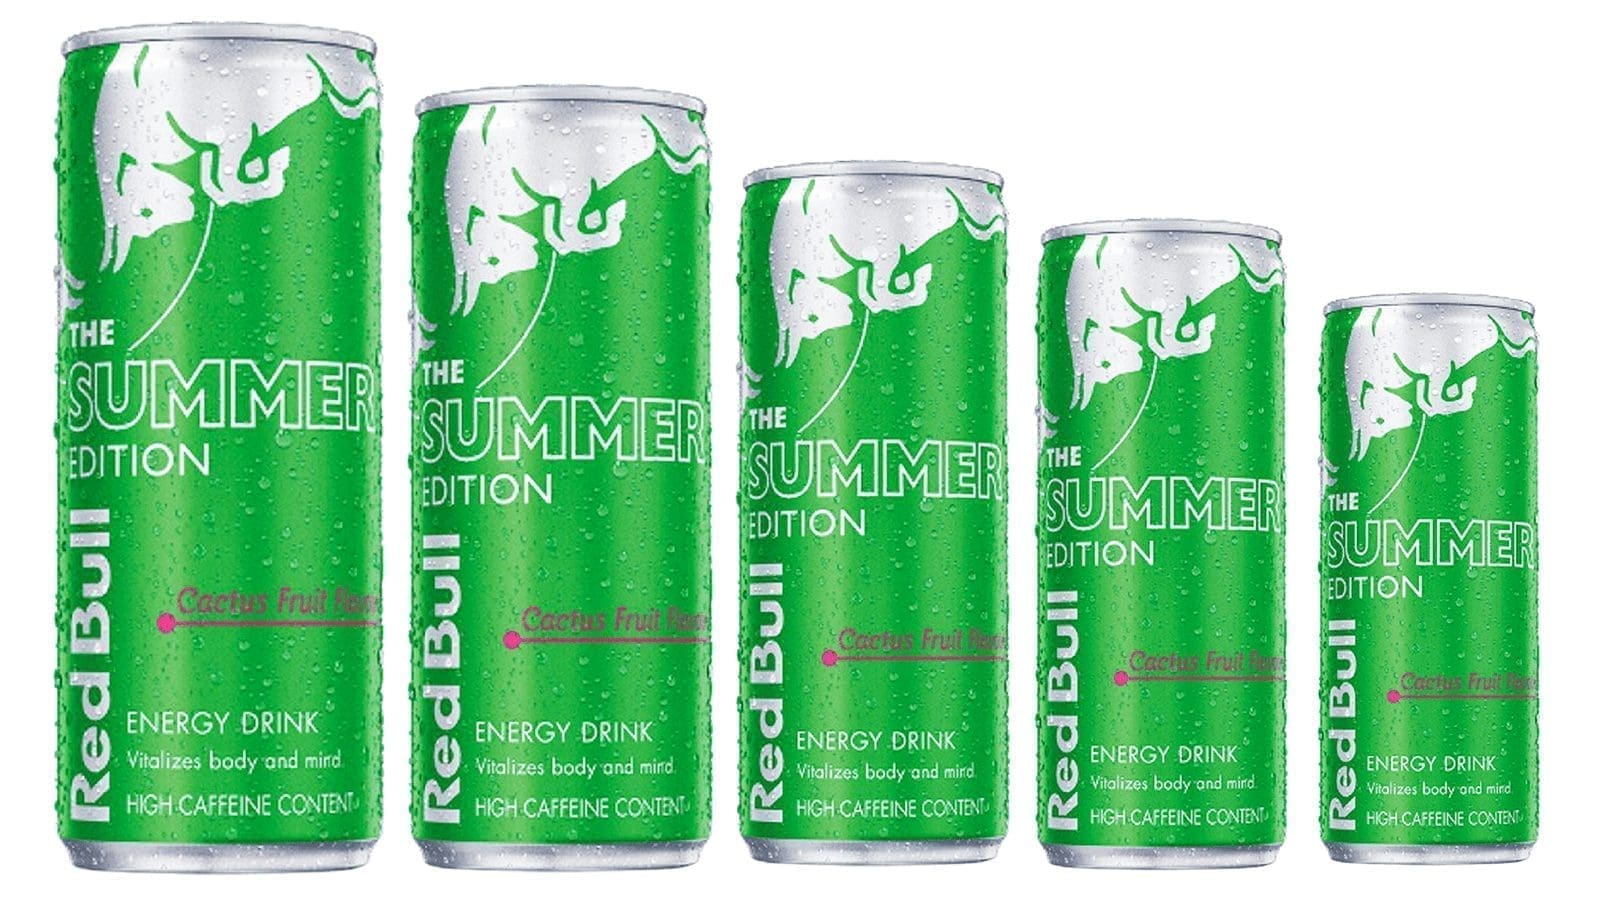 Red Bull reveals new taste in South Africa, beverage industry players promote sustainable operations